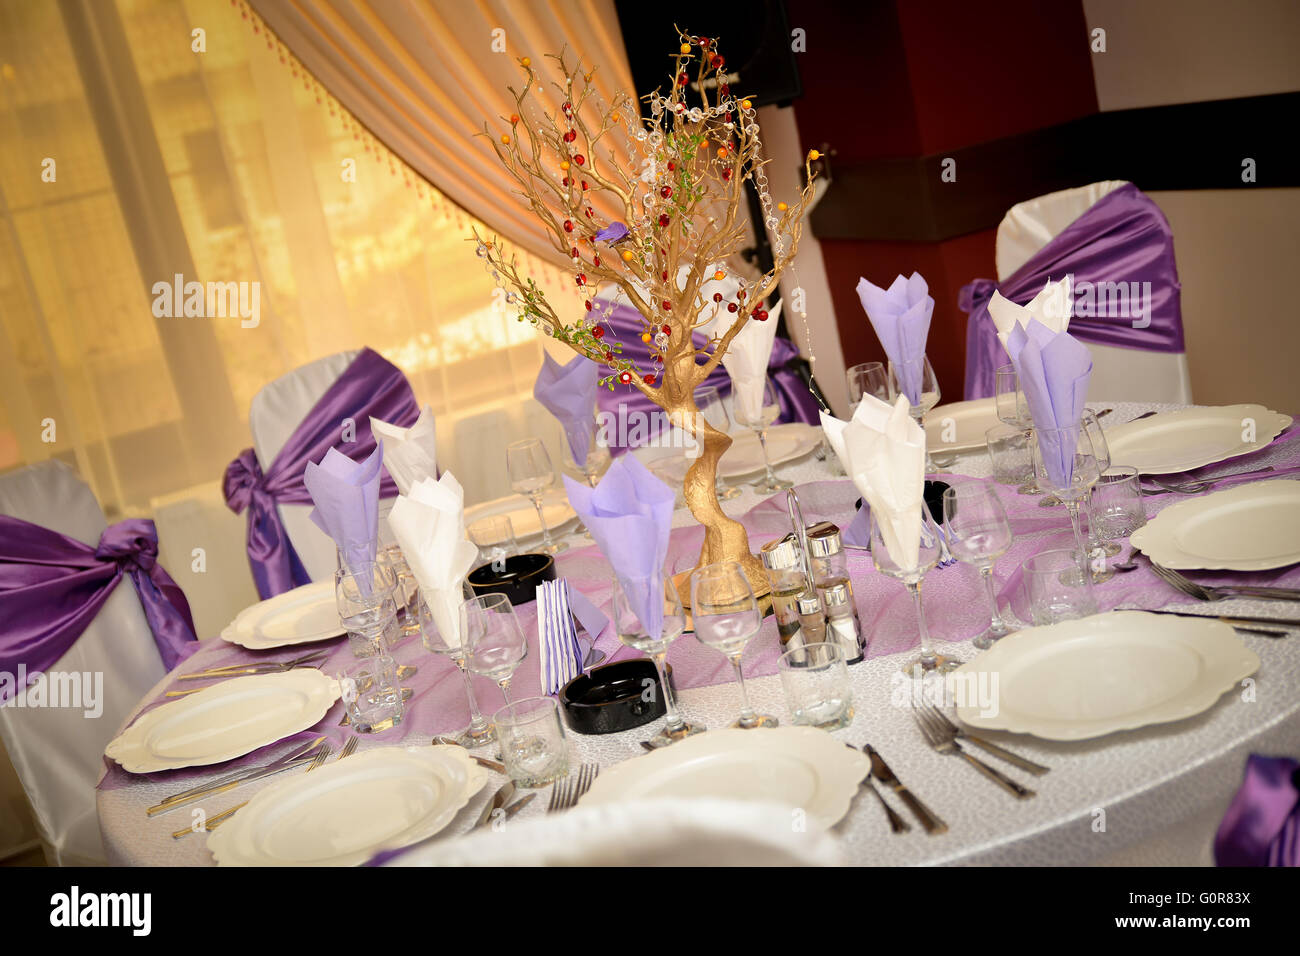 Wedding table with plate, napkin, cutlery on mauve color Stock Photo